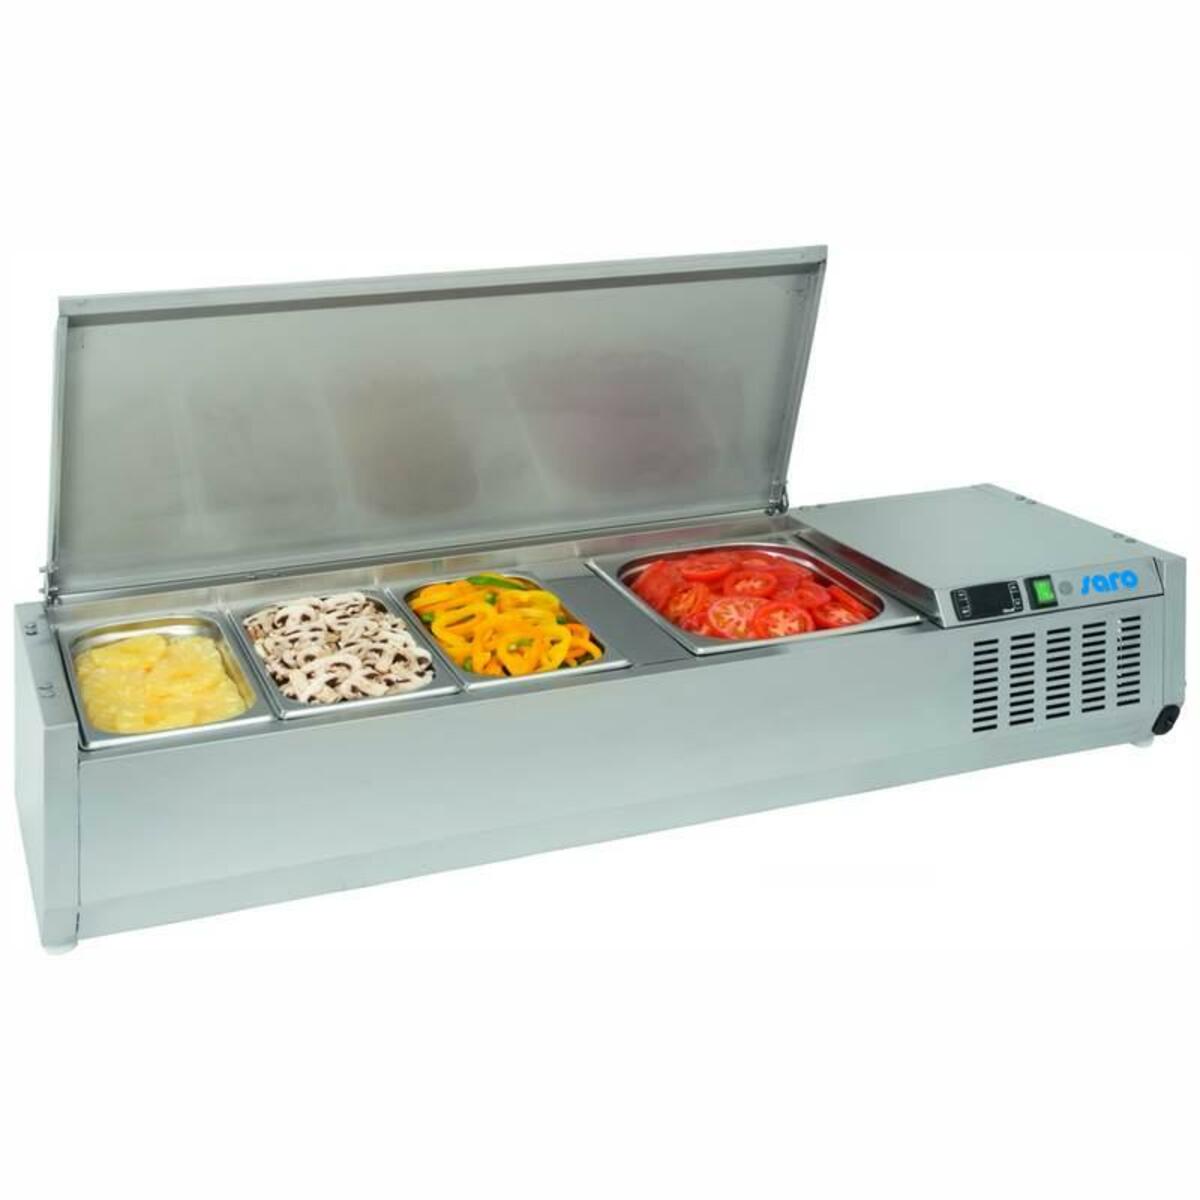 Saladette 8 bacs GN 1/3 couvercle inox